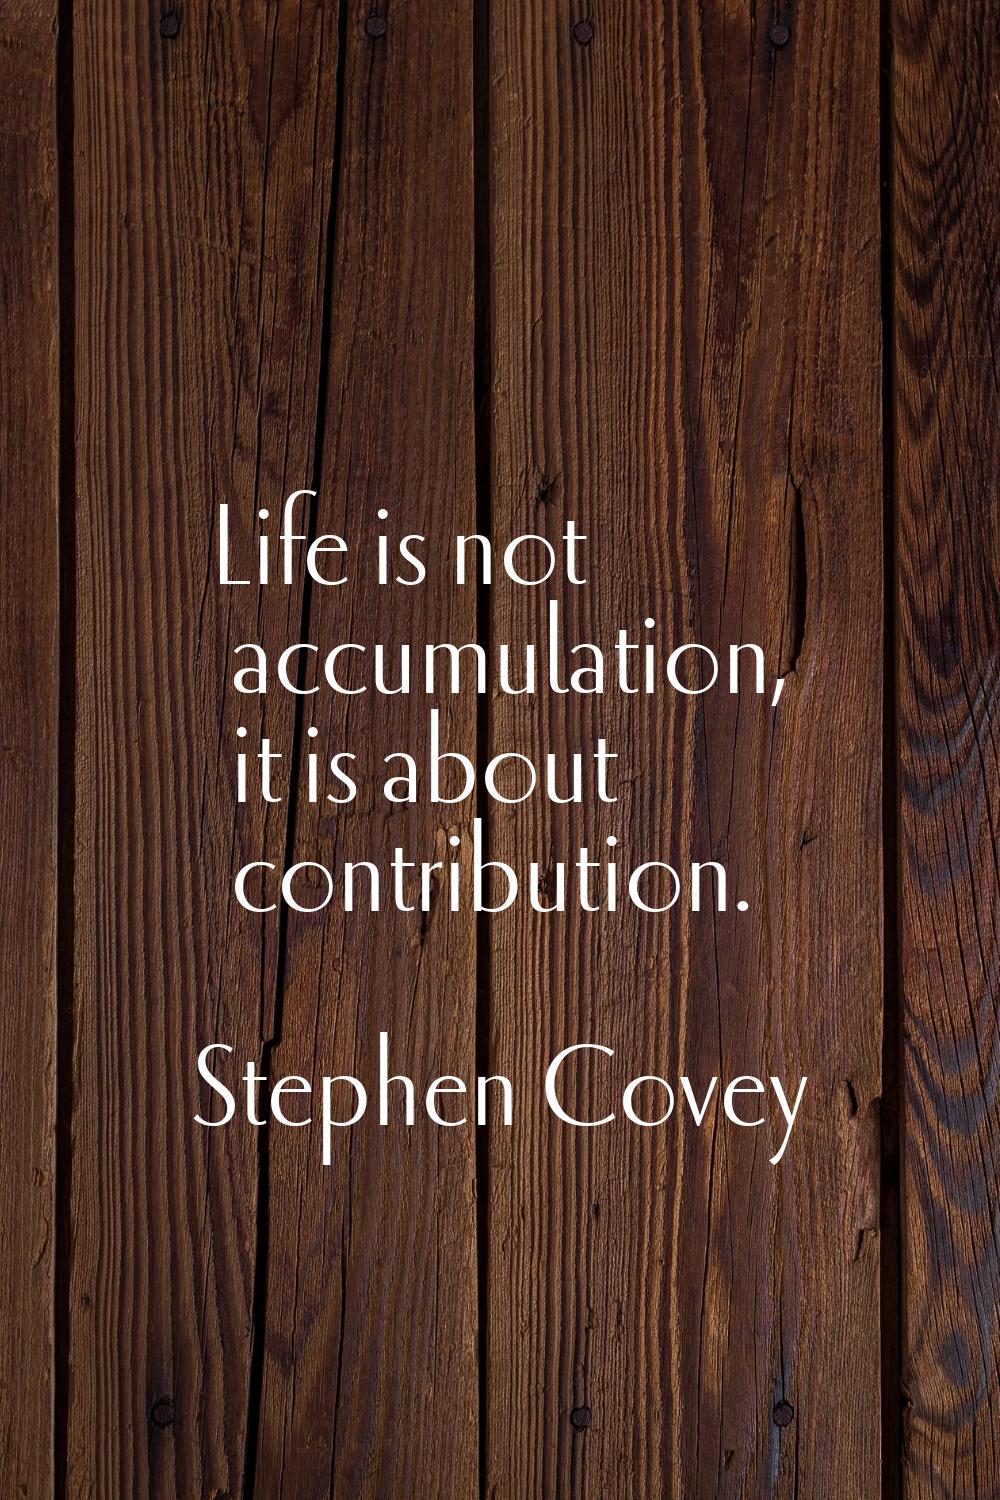 Life is not accumulation, it is about contribution.